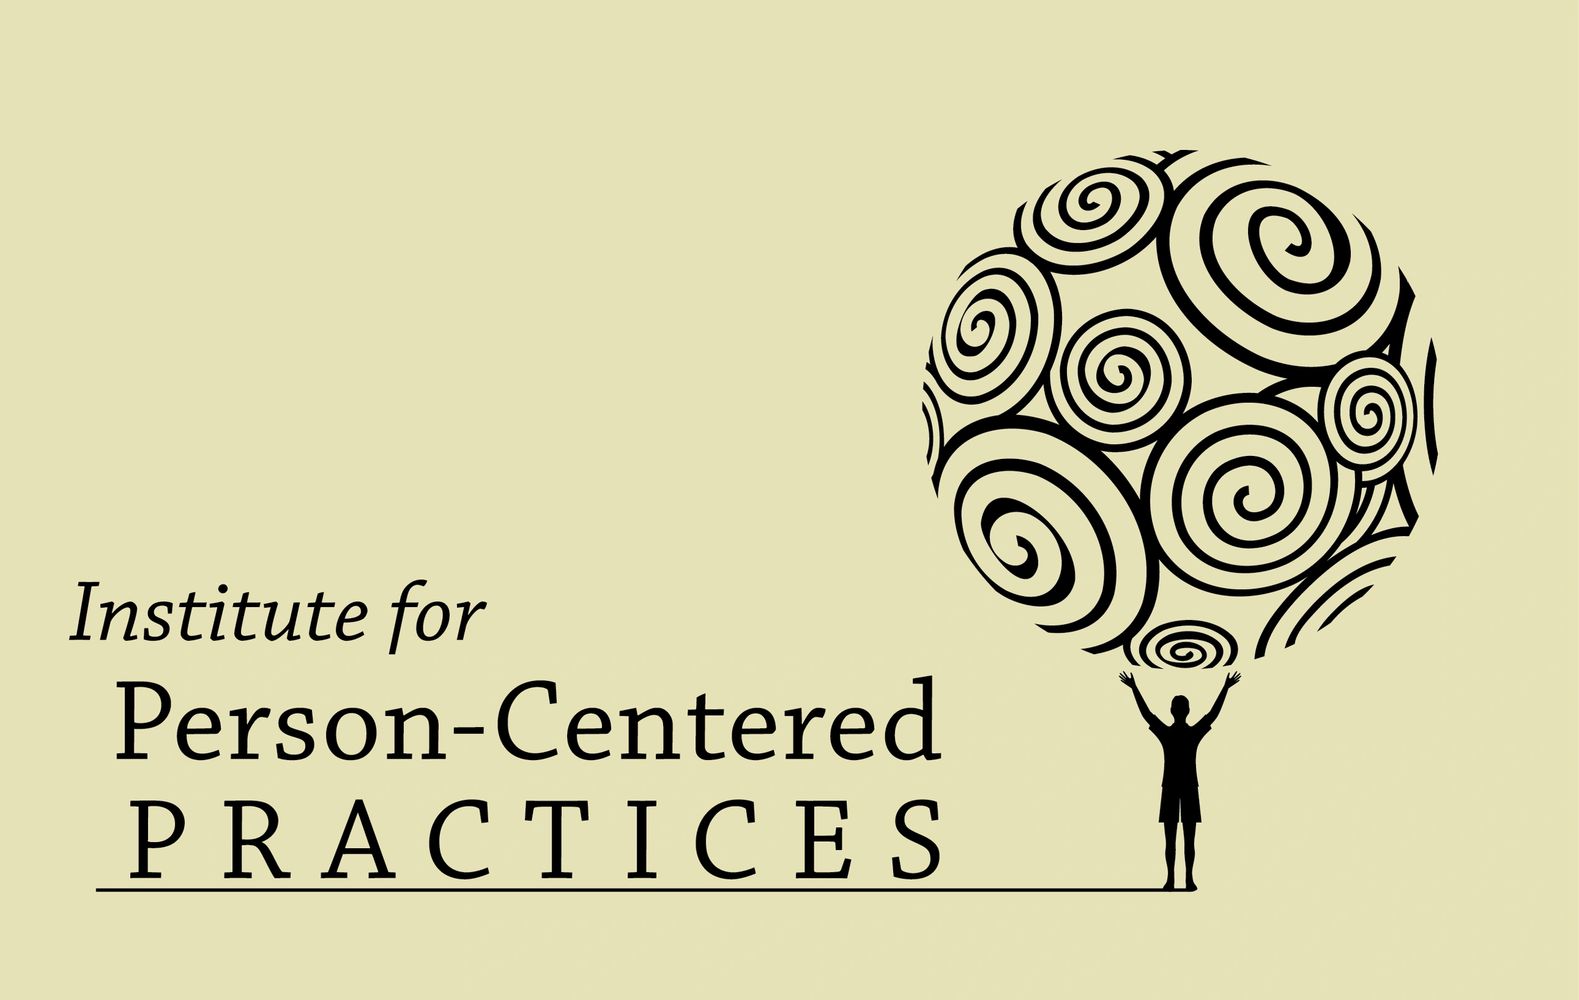 Institute for Person-Centered PRACTICES with a sillhouette of a person hold up a sphere of spirals